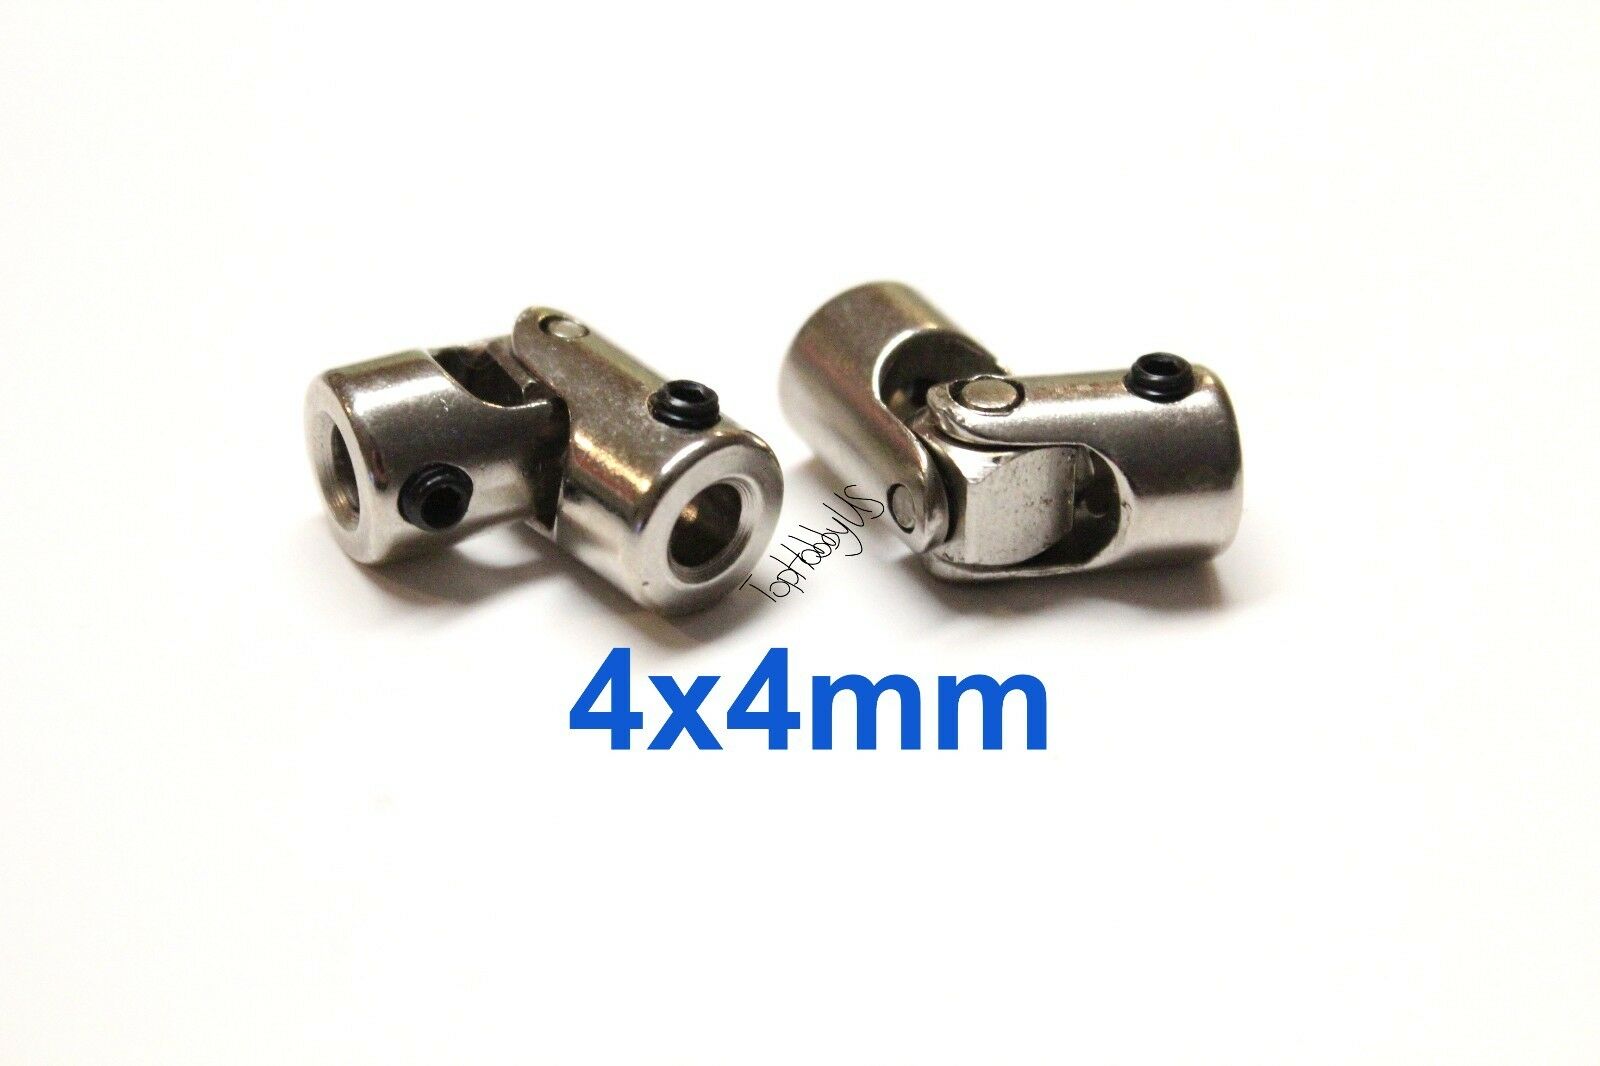 2pcs 4x4mm Rc Boat U-joint With Set Screws High Quality (us Good Seller/ship)